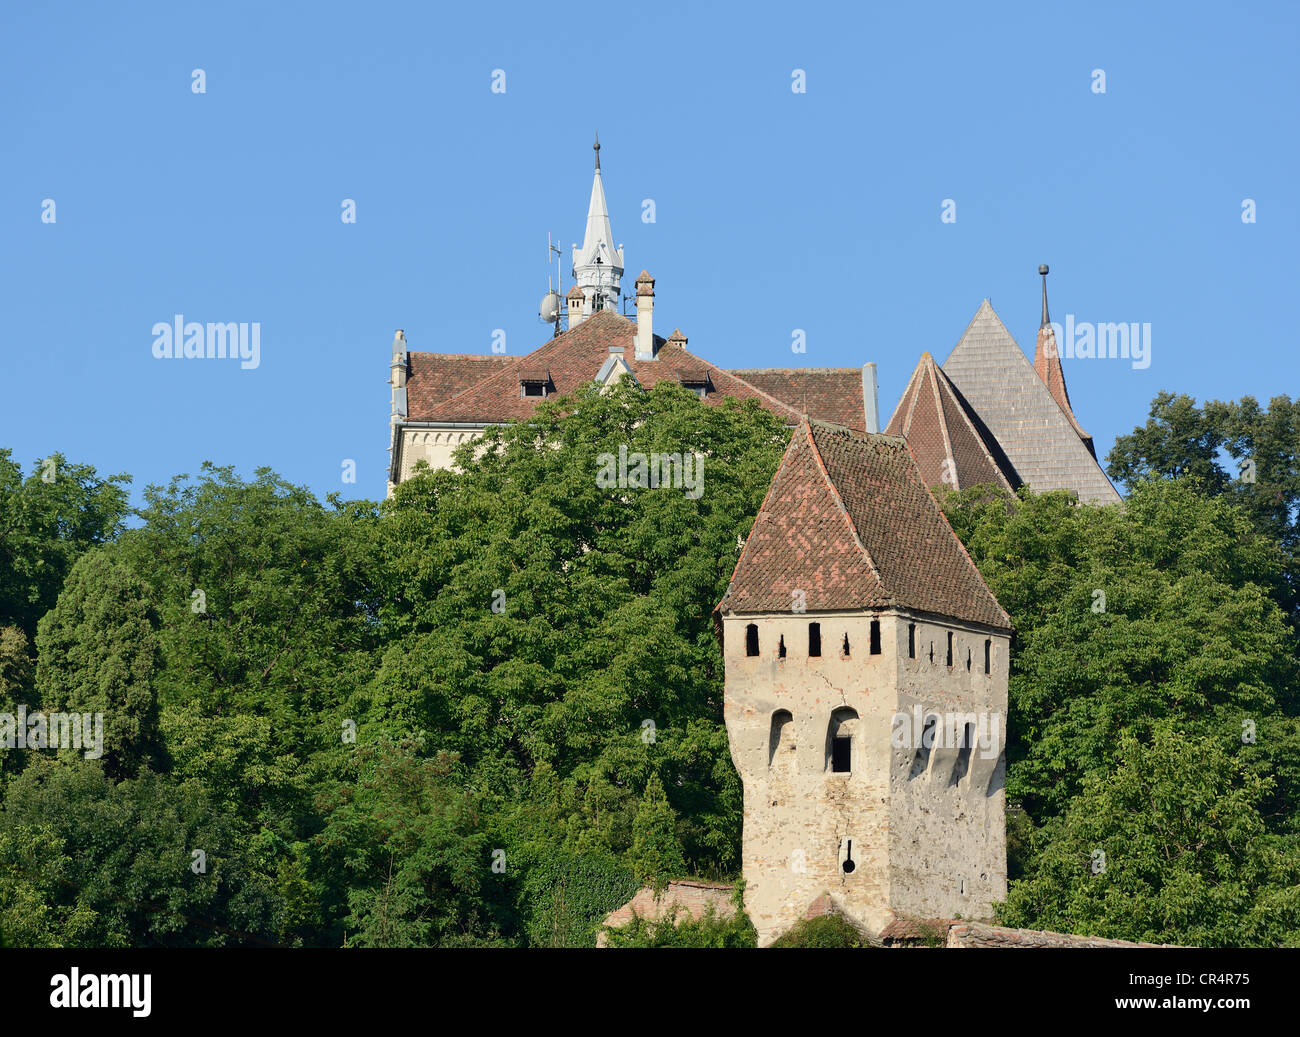 View of the Tin Coaters Tower and the Church on the Hill, UNESCO World Heritage Site, Sighisoara, Transylvania, Romania, Europe Stock Photo